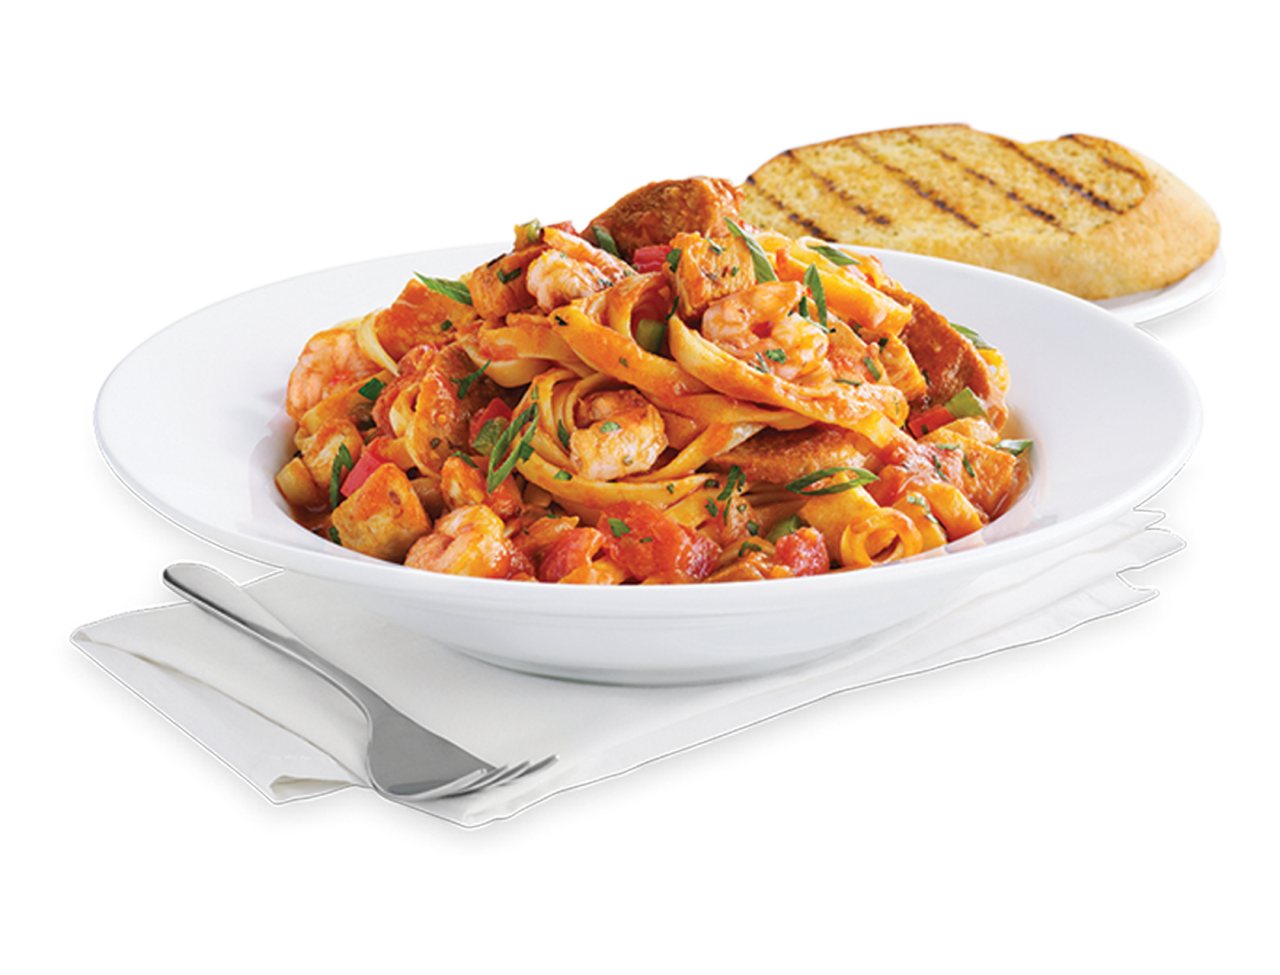 https://bostonpizza.com/en/promotions/pastatuesday/pasta-personality-jambalaya-fettuccini/_jcr_content/root/container_73434033/container/image_copy.coreimg.85.1280.png/1673969288795/201705-jambalaya-fettuccini-1680x12080.png